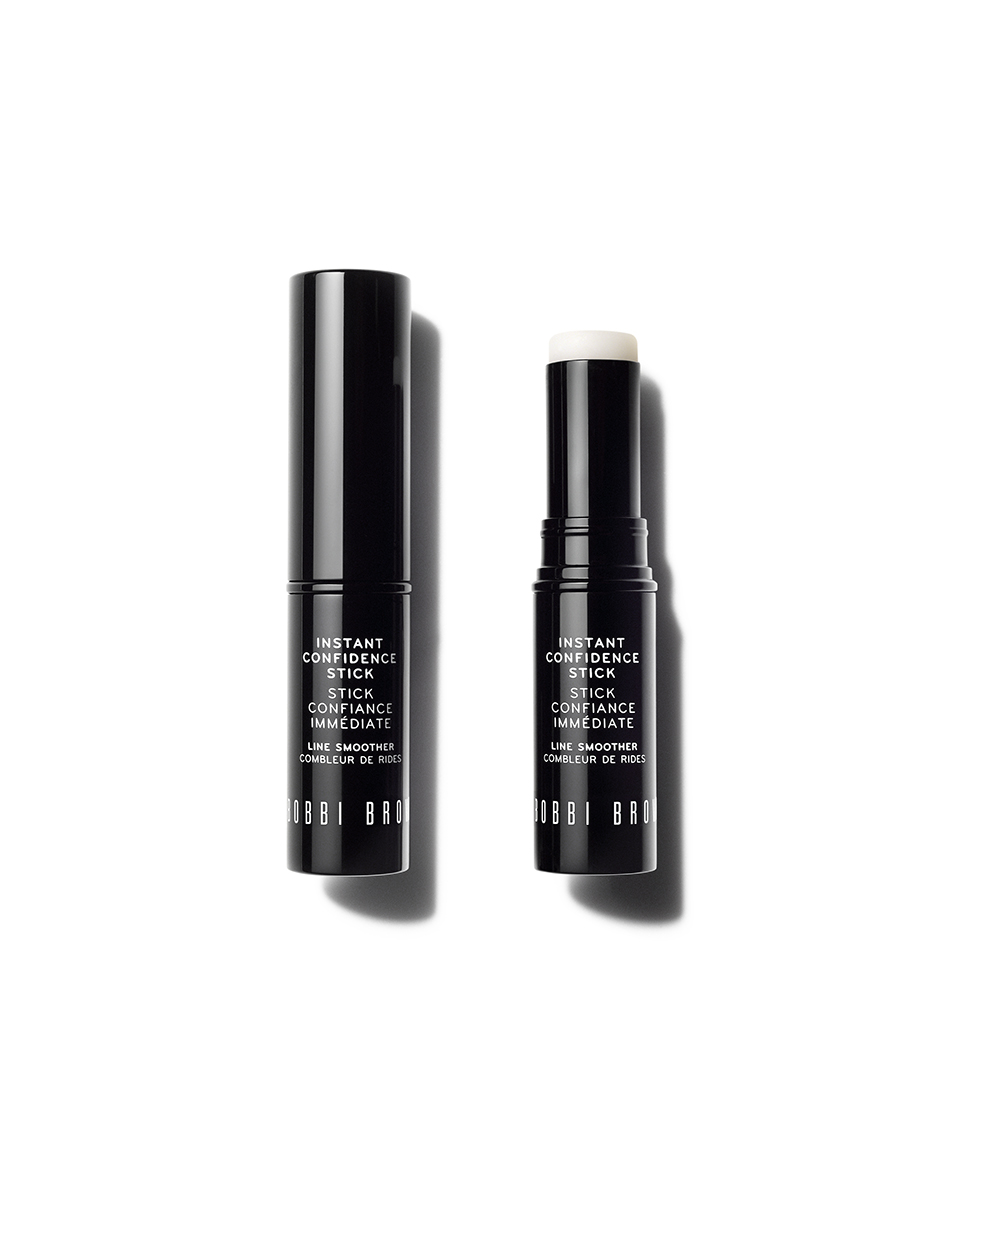 Thanks to a clever light-diffusing formula, swipe Bobbi Brown Instant Confidence Stick, $76, over lines and wrinkles before or after make-up to give them an instant smoothed-out effect